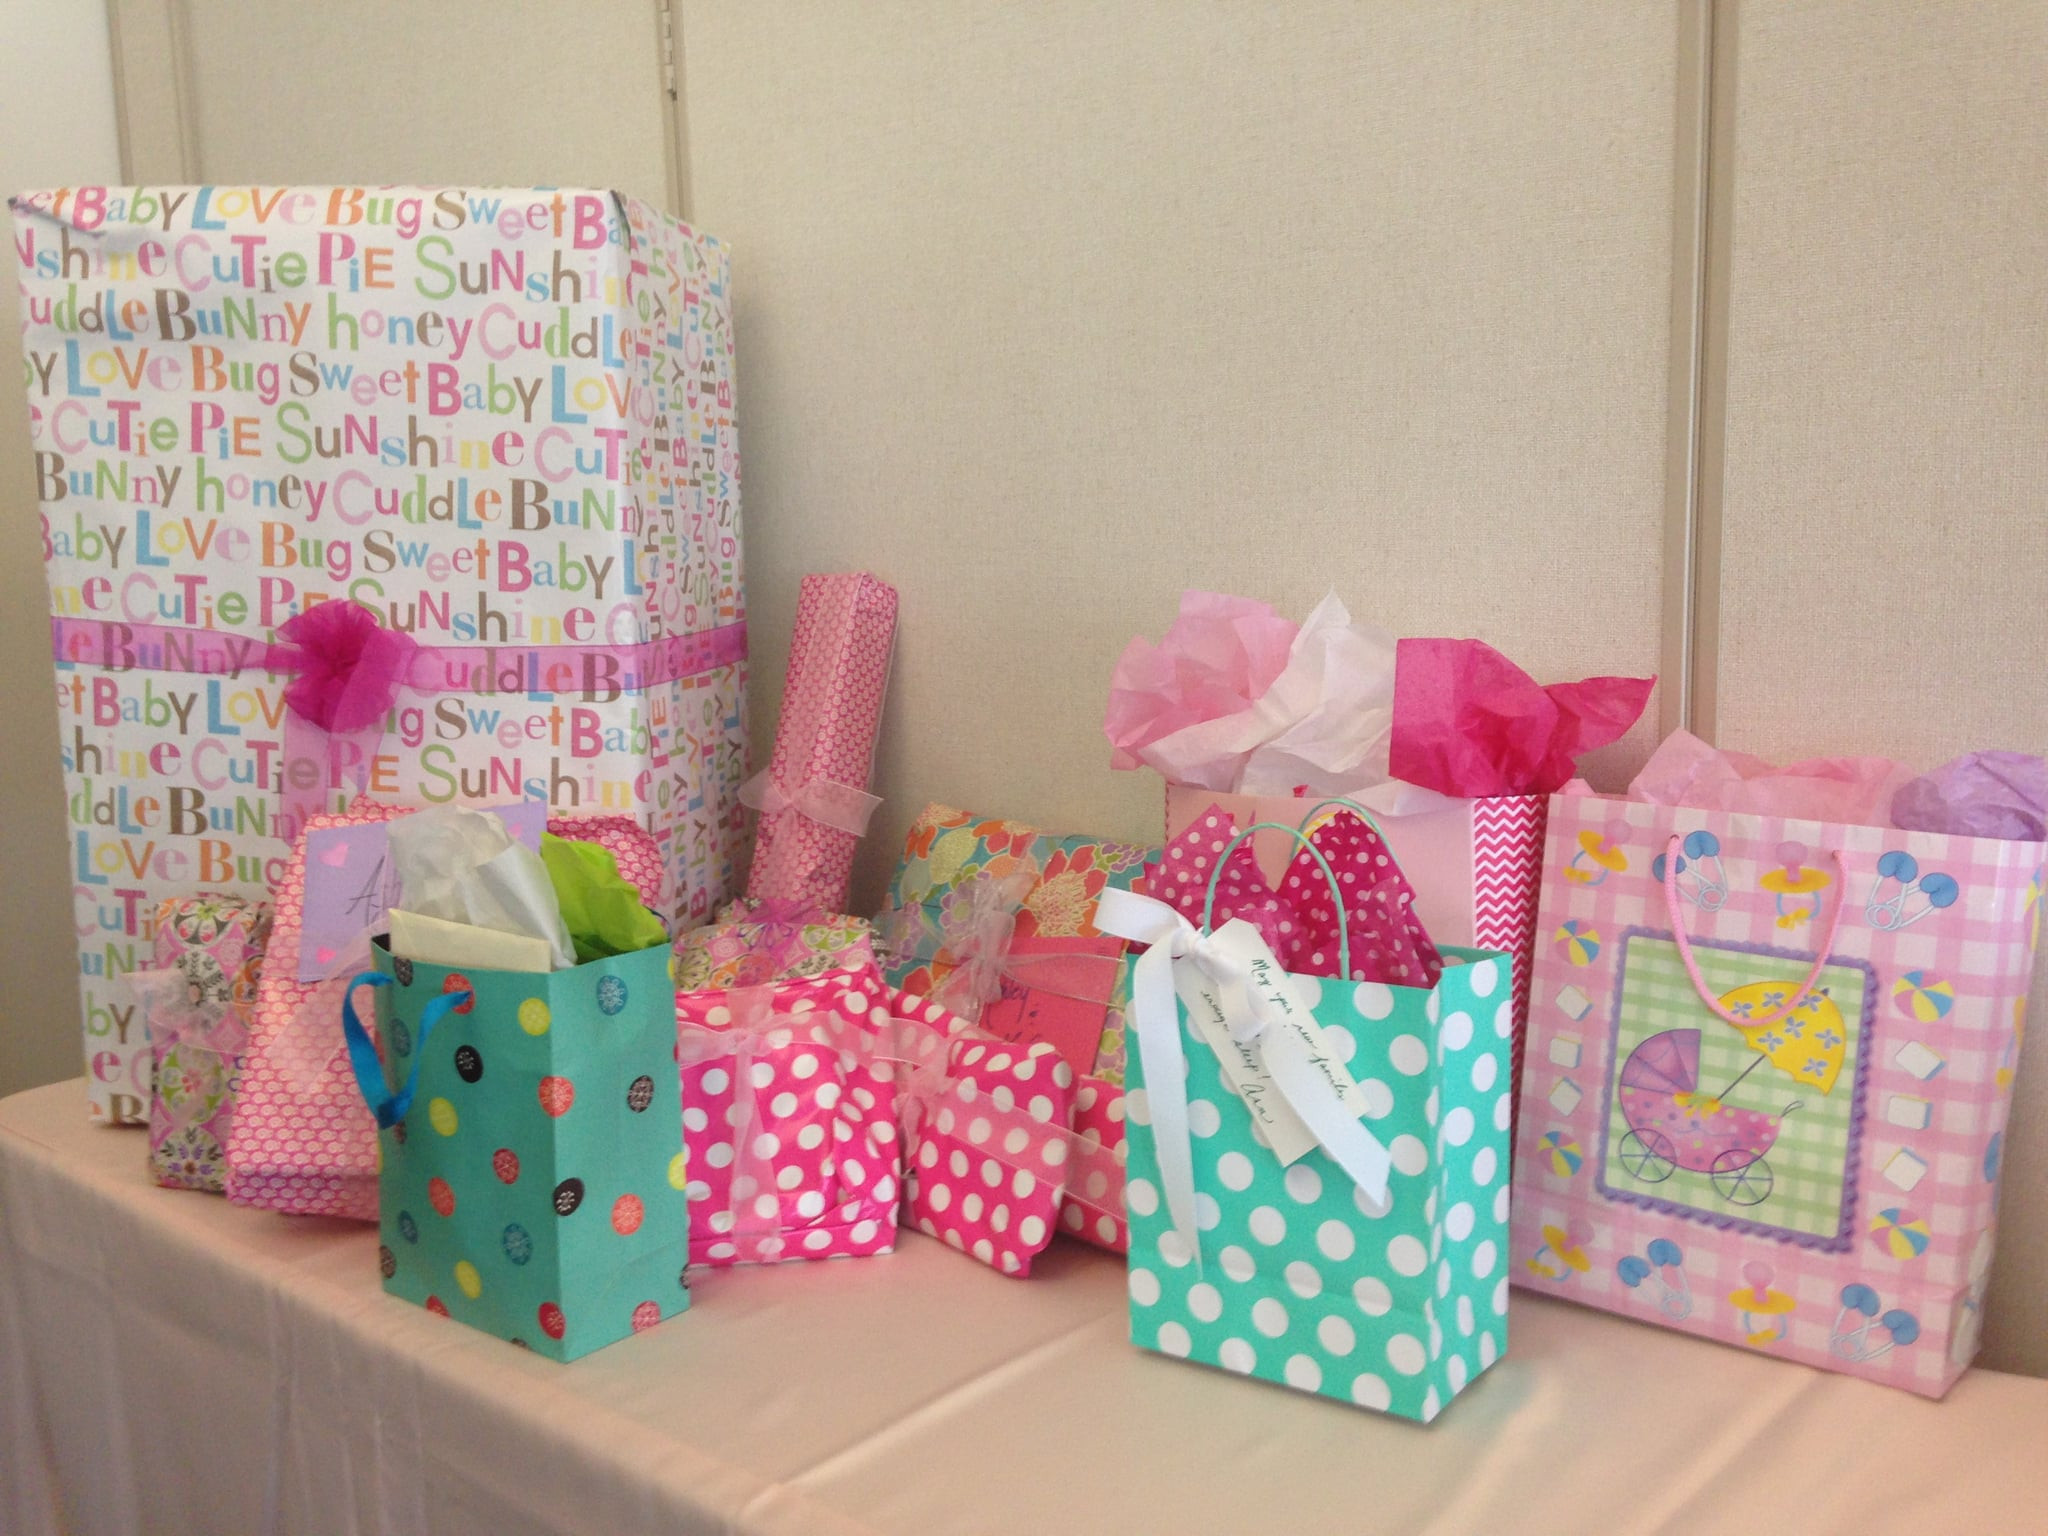 Baby Shower Gifts For Best Friend
 How Much Should You Spend on a Baby Shower Gift